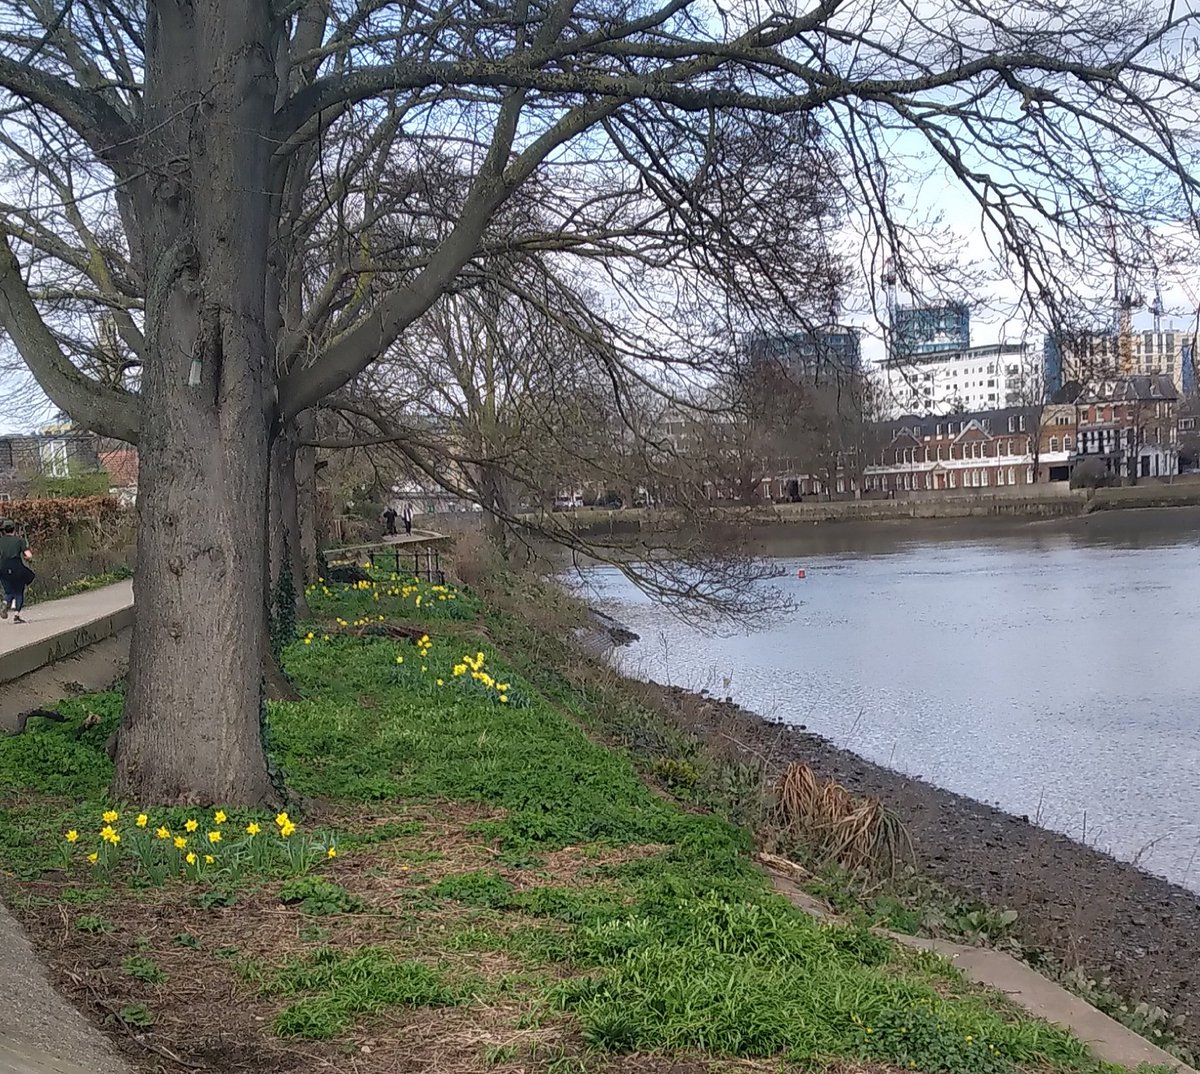 Thank you to the person who planted these daffs on the Kew riverbank for everyone to enjoy. #guerillagardening